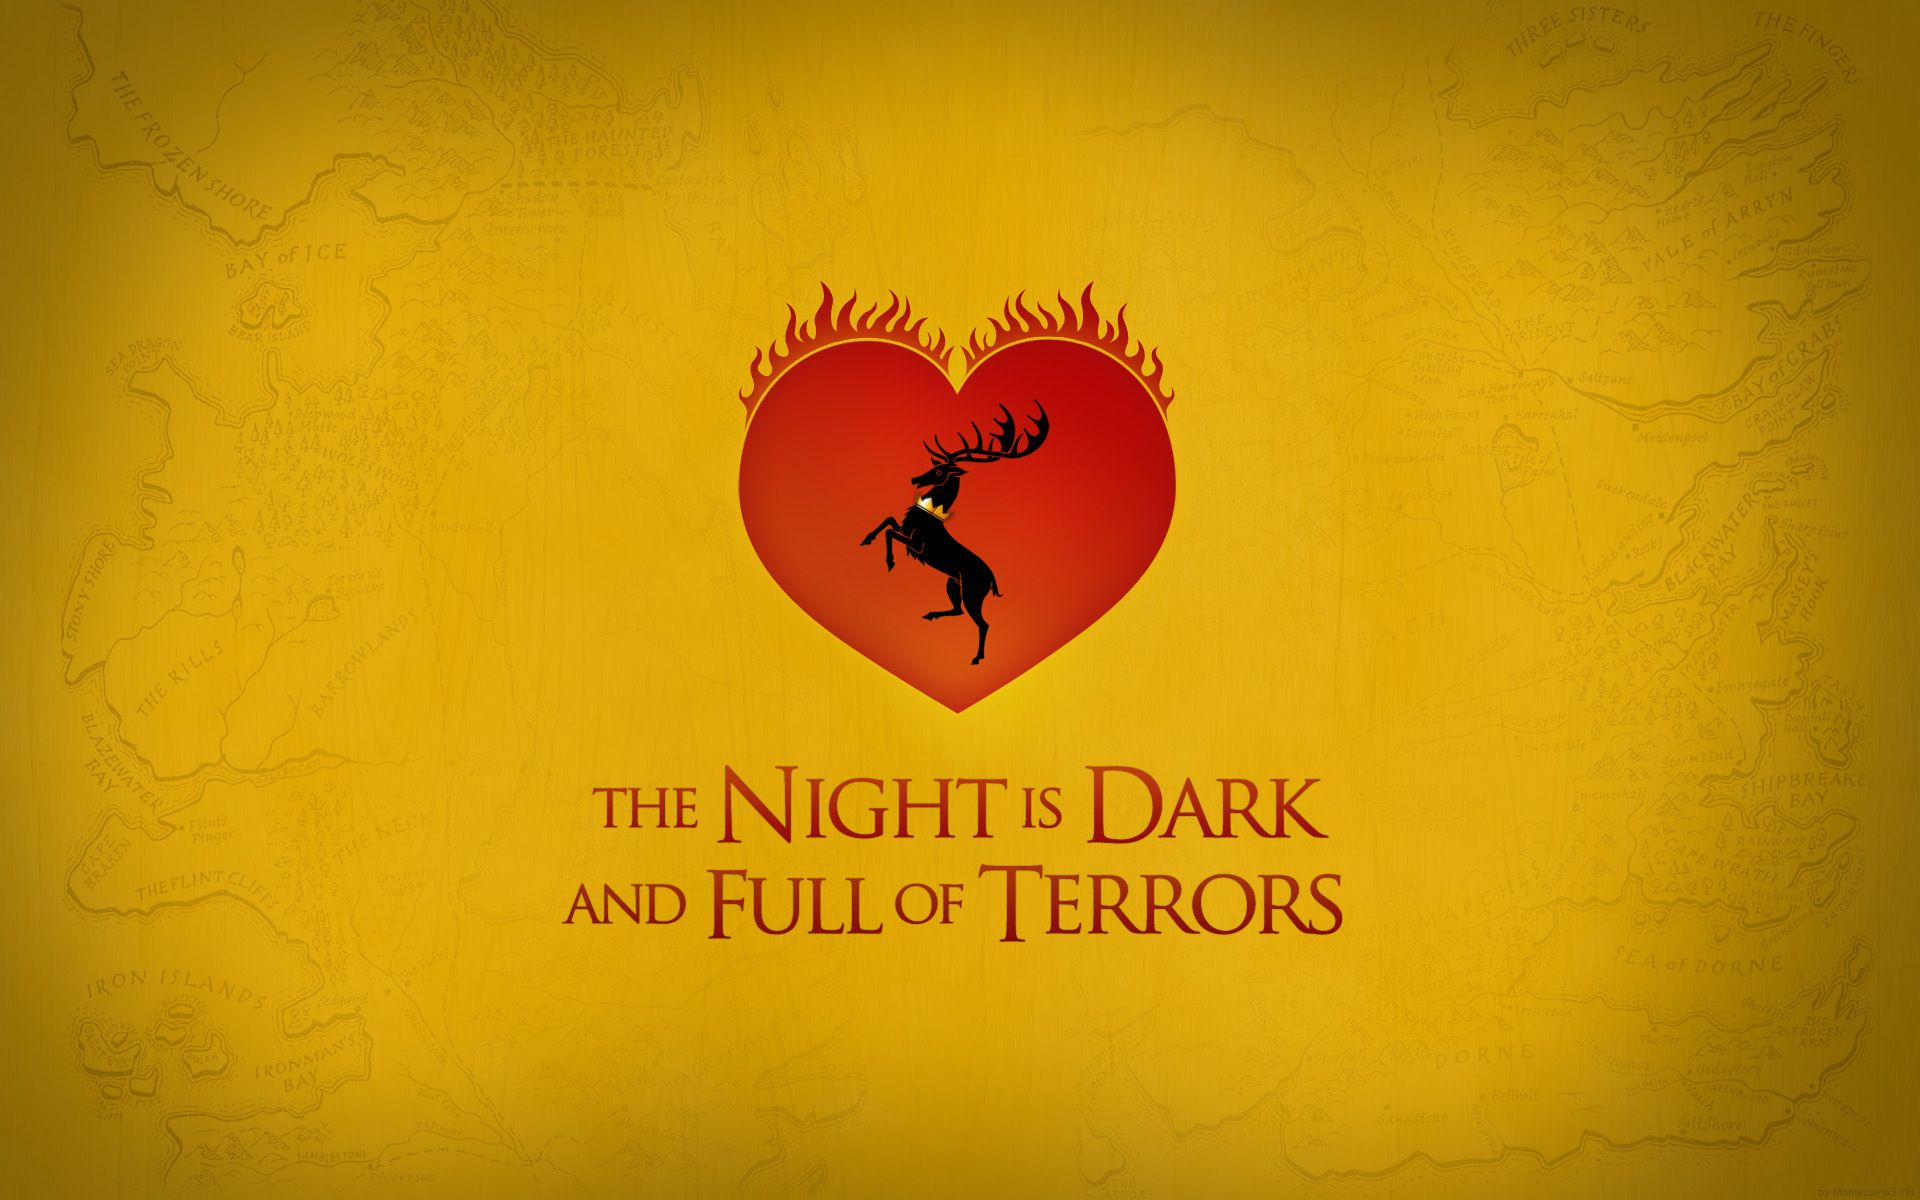 1920x1200 A Song of Ice and Fire Wallpaper: House Baratheon | Baratheon, A song of ice and fire, Game of thrones books